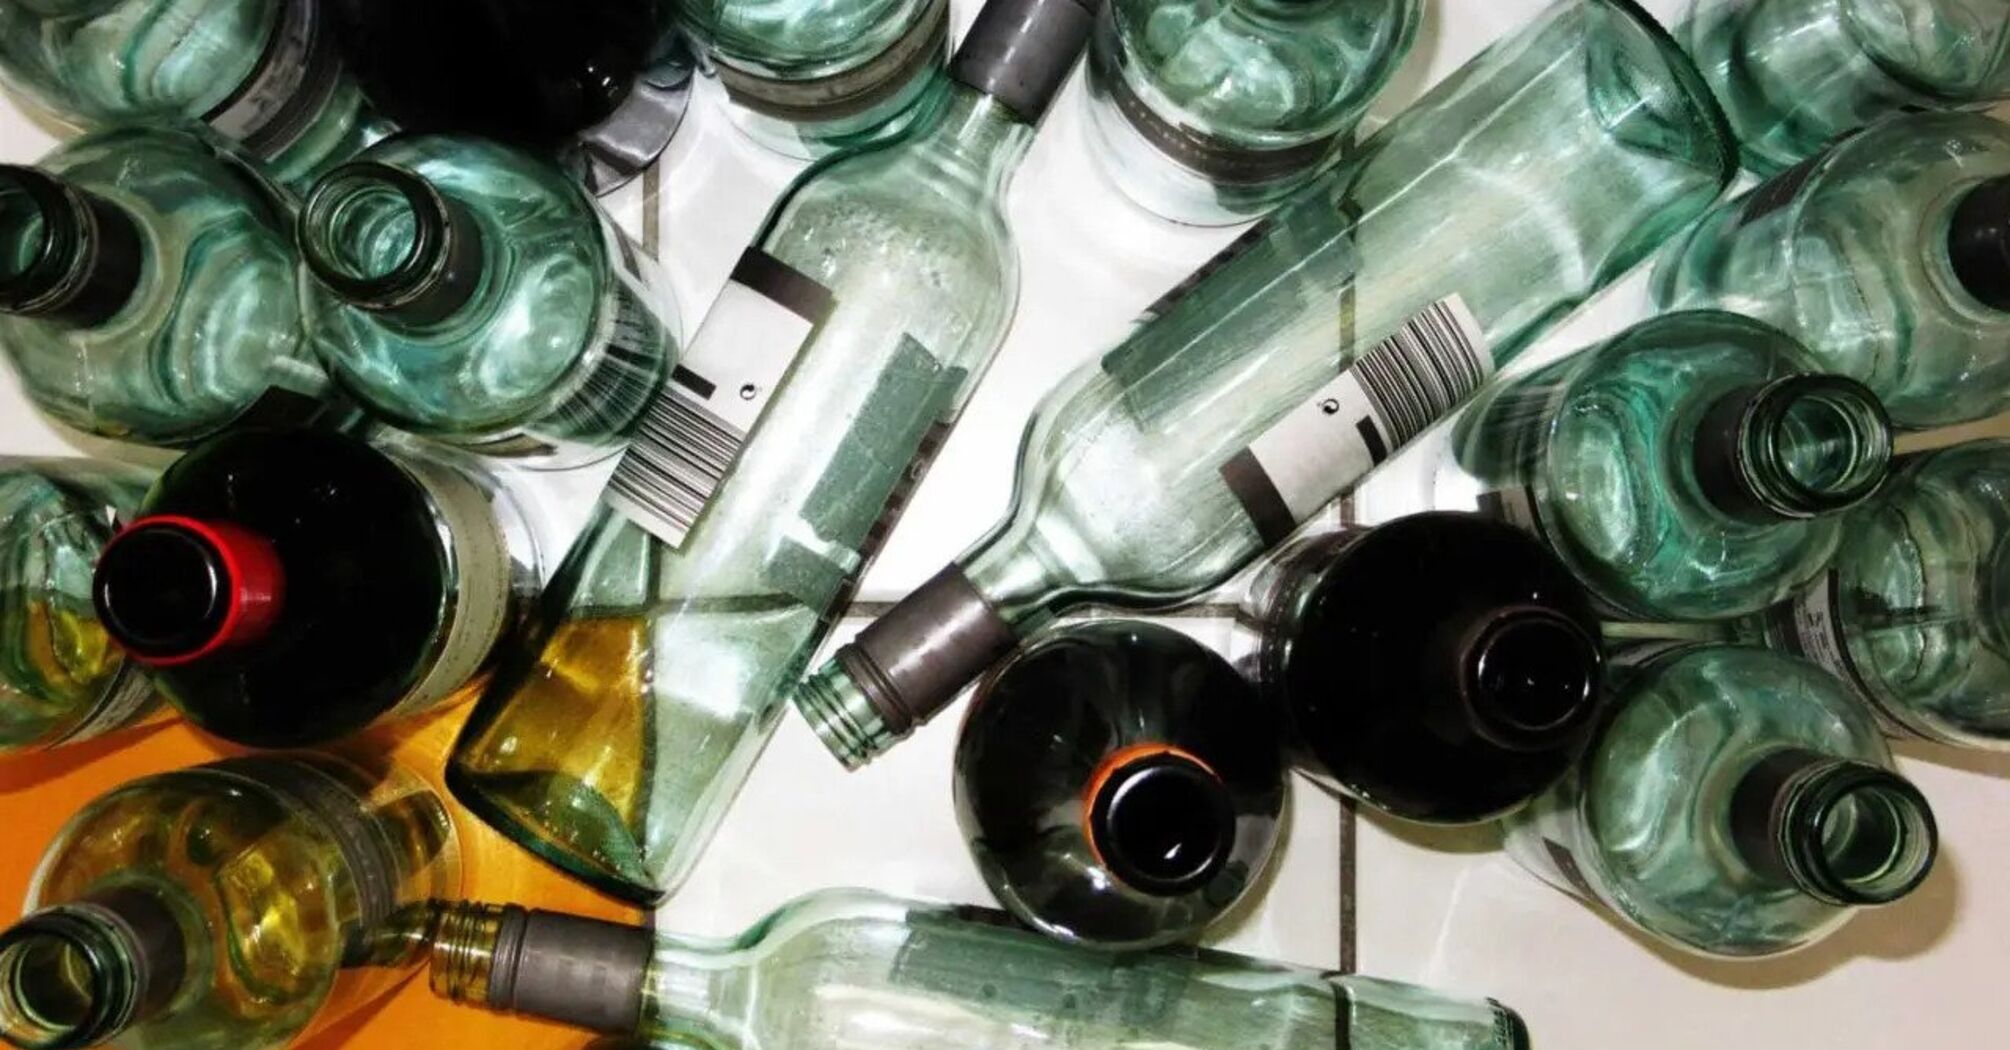 Why empty bottles should always be removed from the table